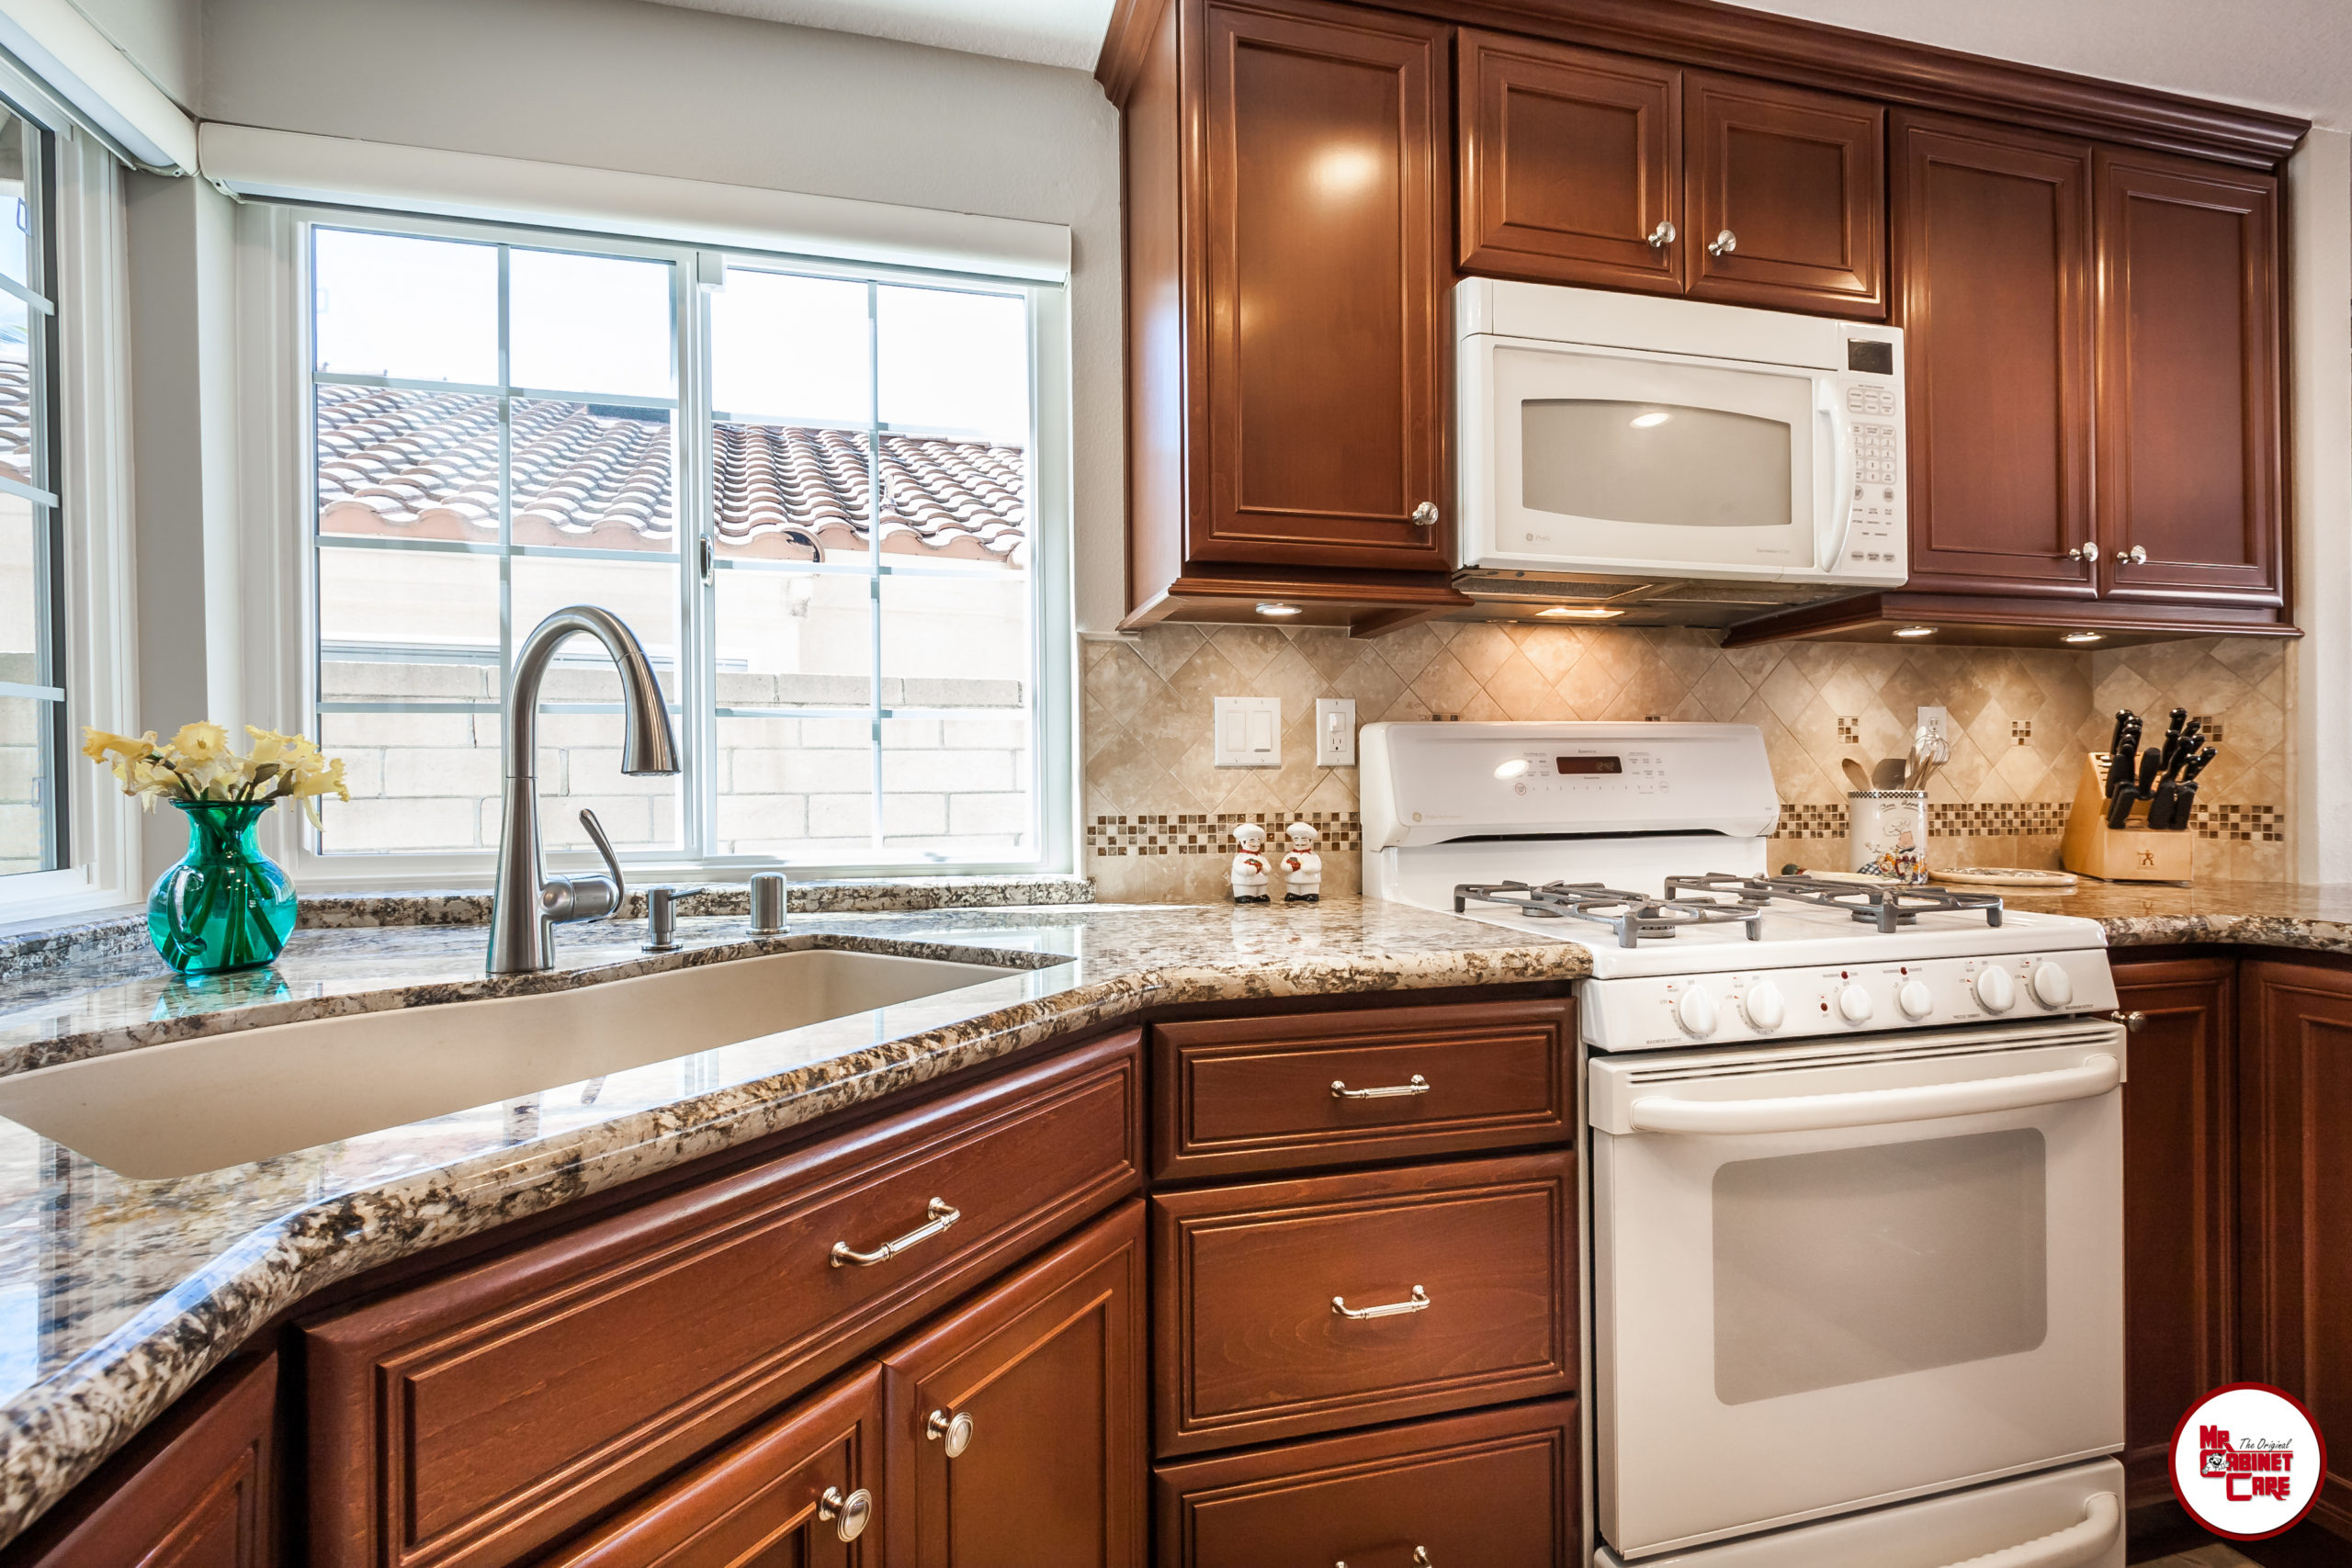 Kitchen Remodeling Services in Rancho Palos Verdes